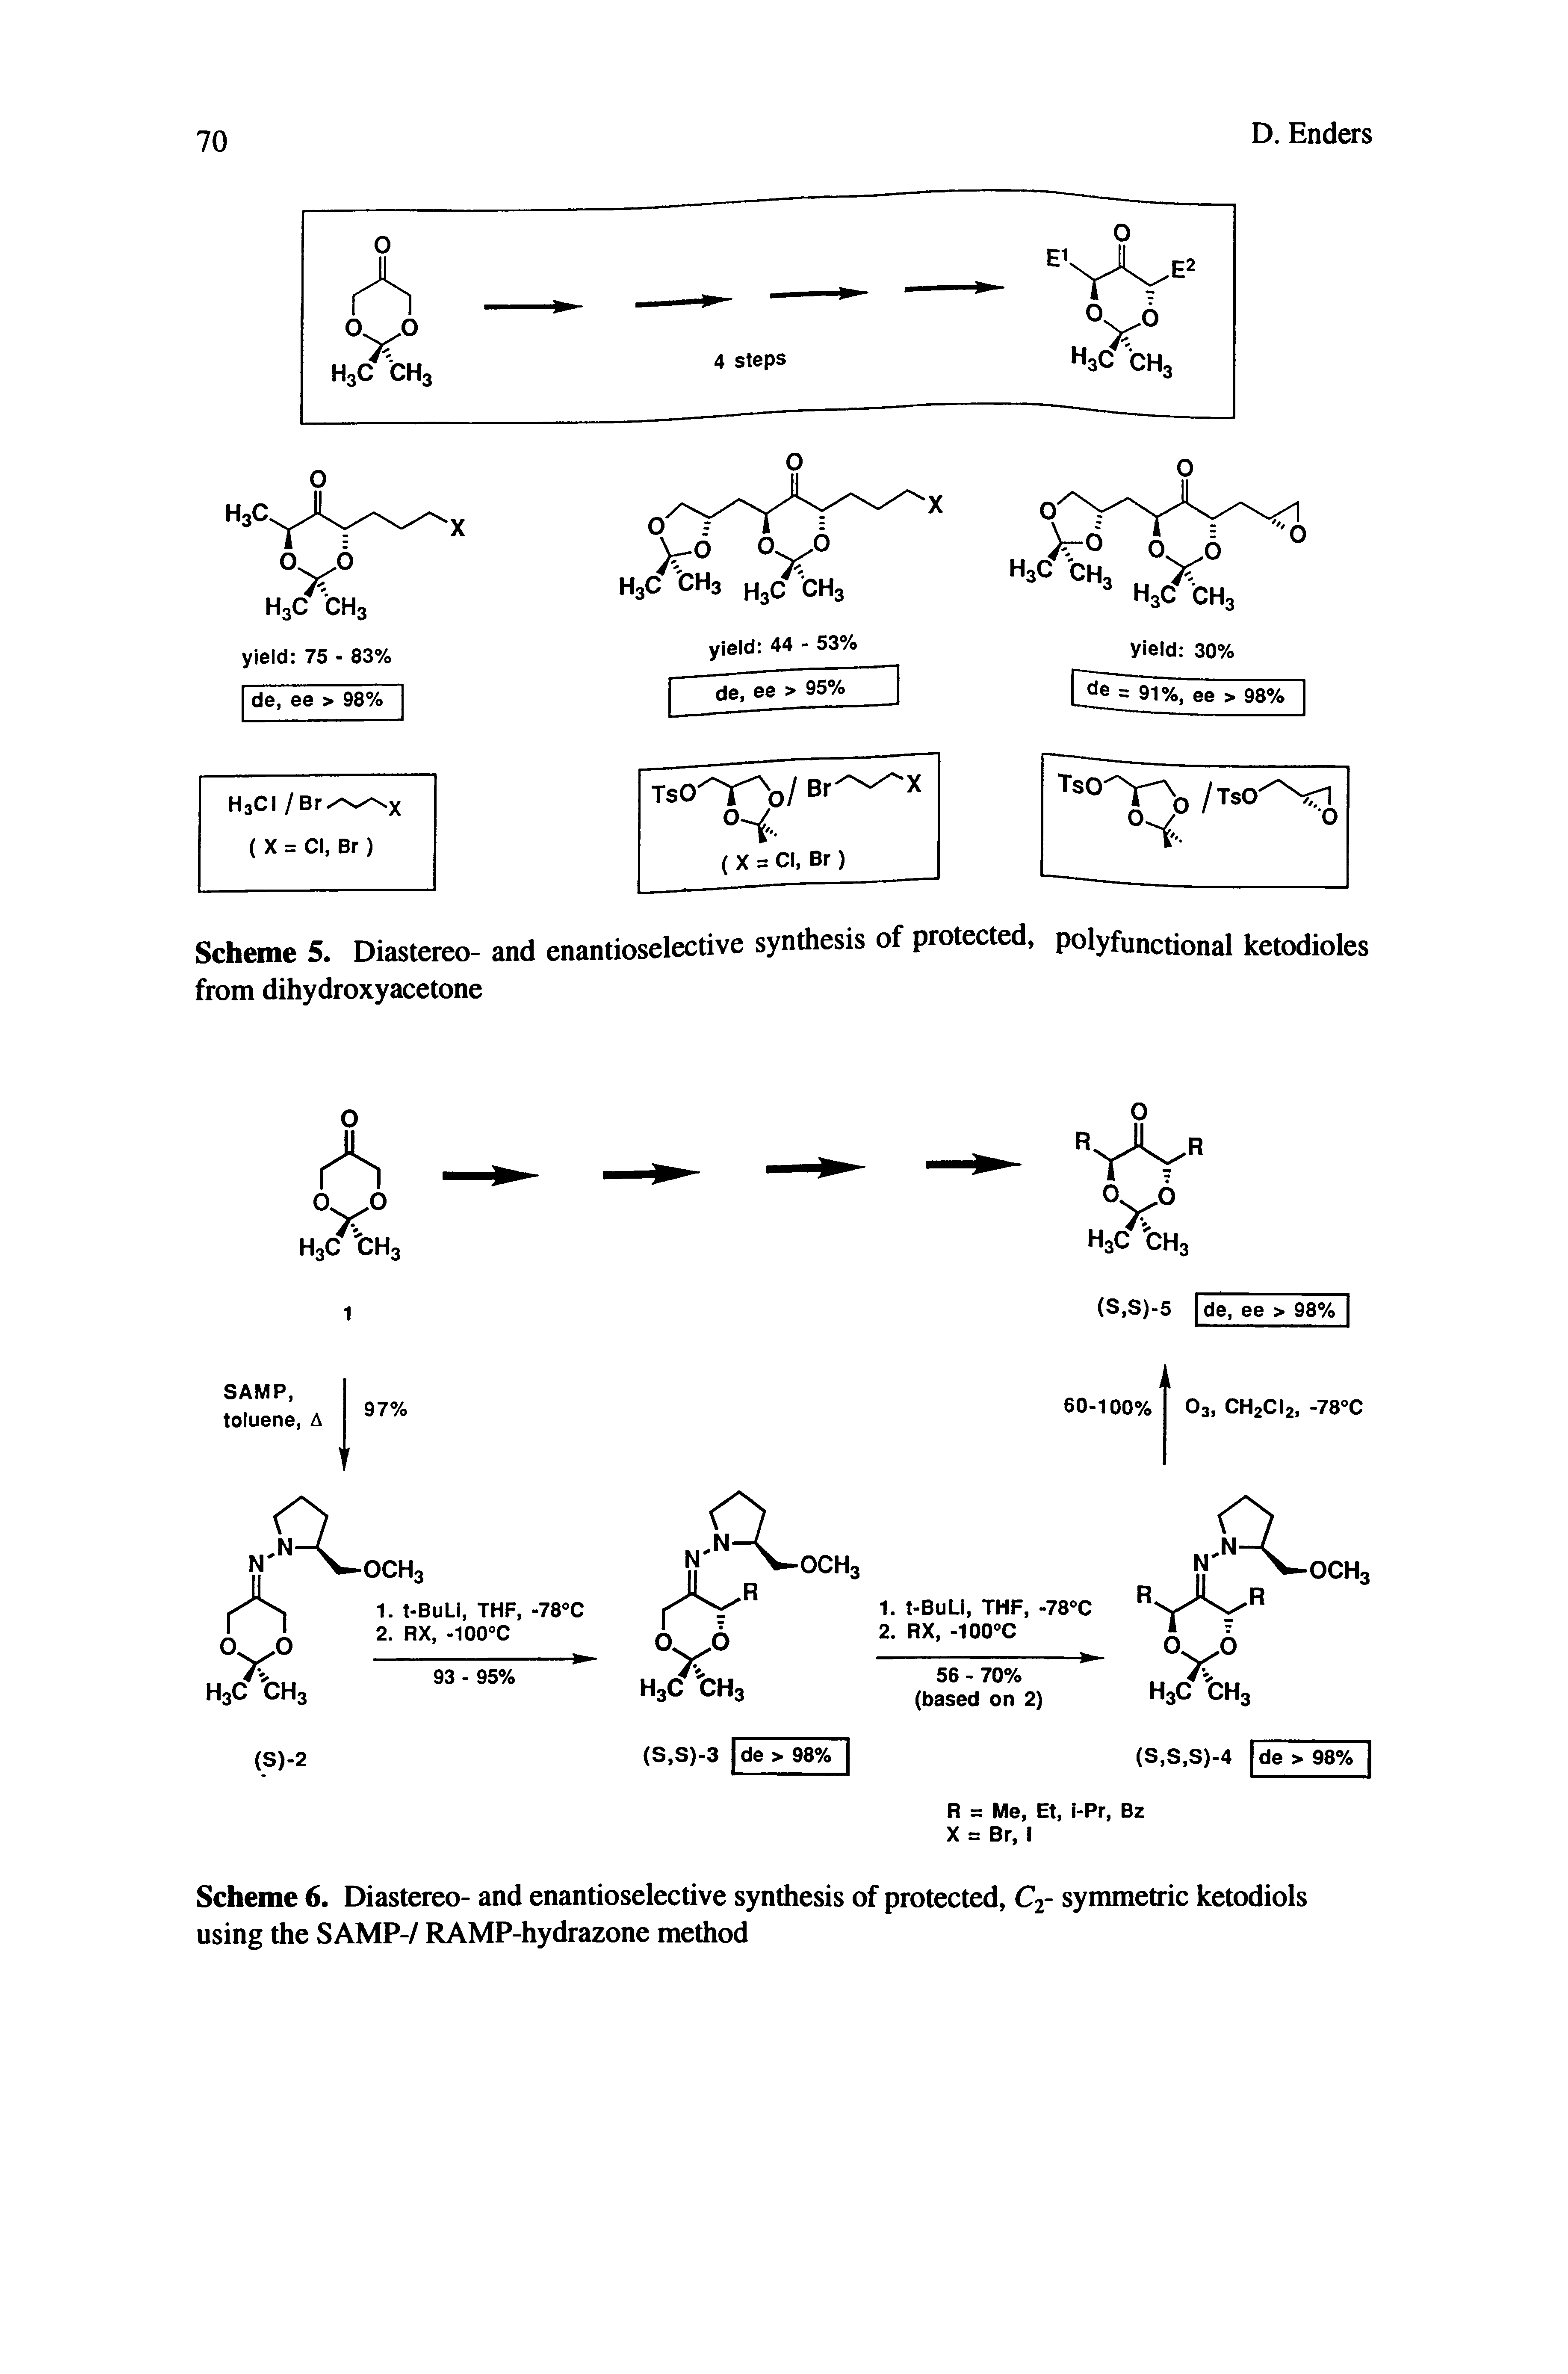 Scheme 6. Diastereo- and enantioselective synthesis of protected, C2- symmetric ketodiols using the SAMP-/ RAMP-hydrazone method...